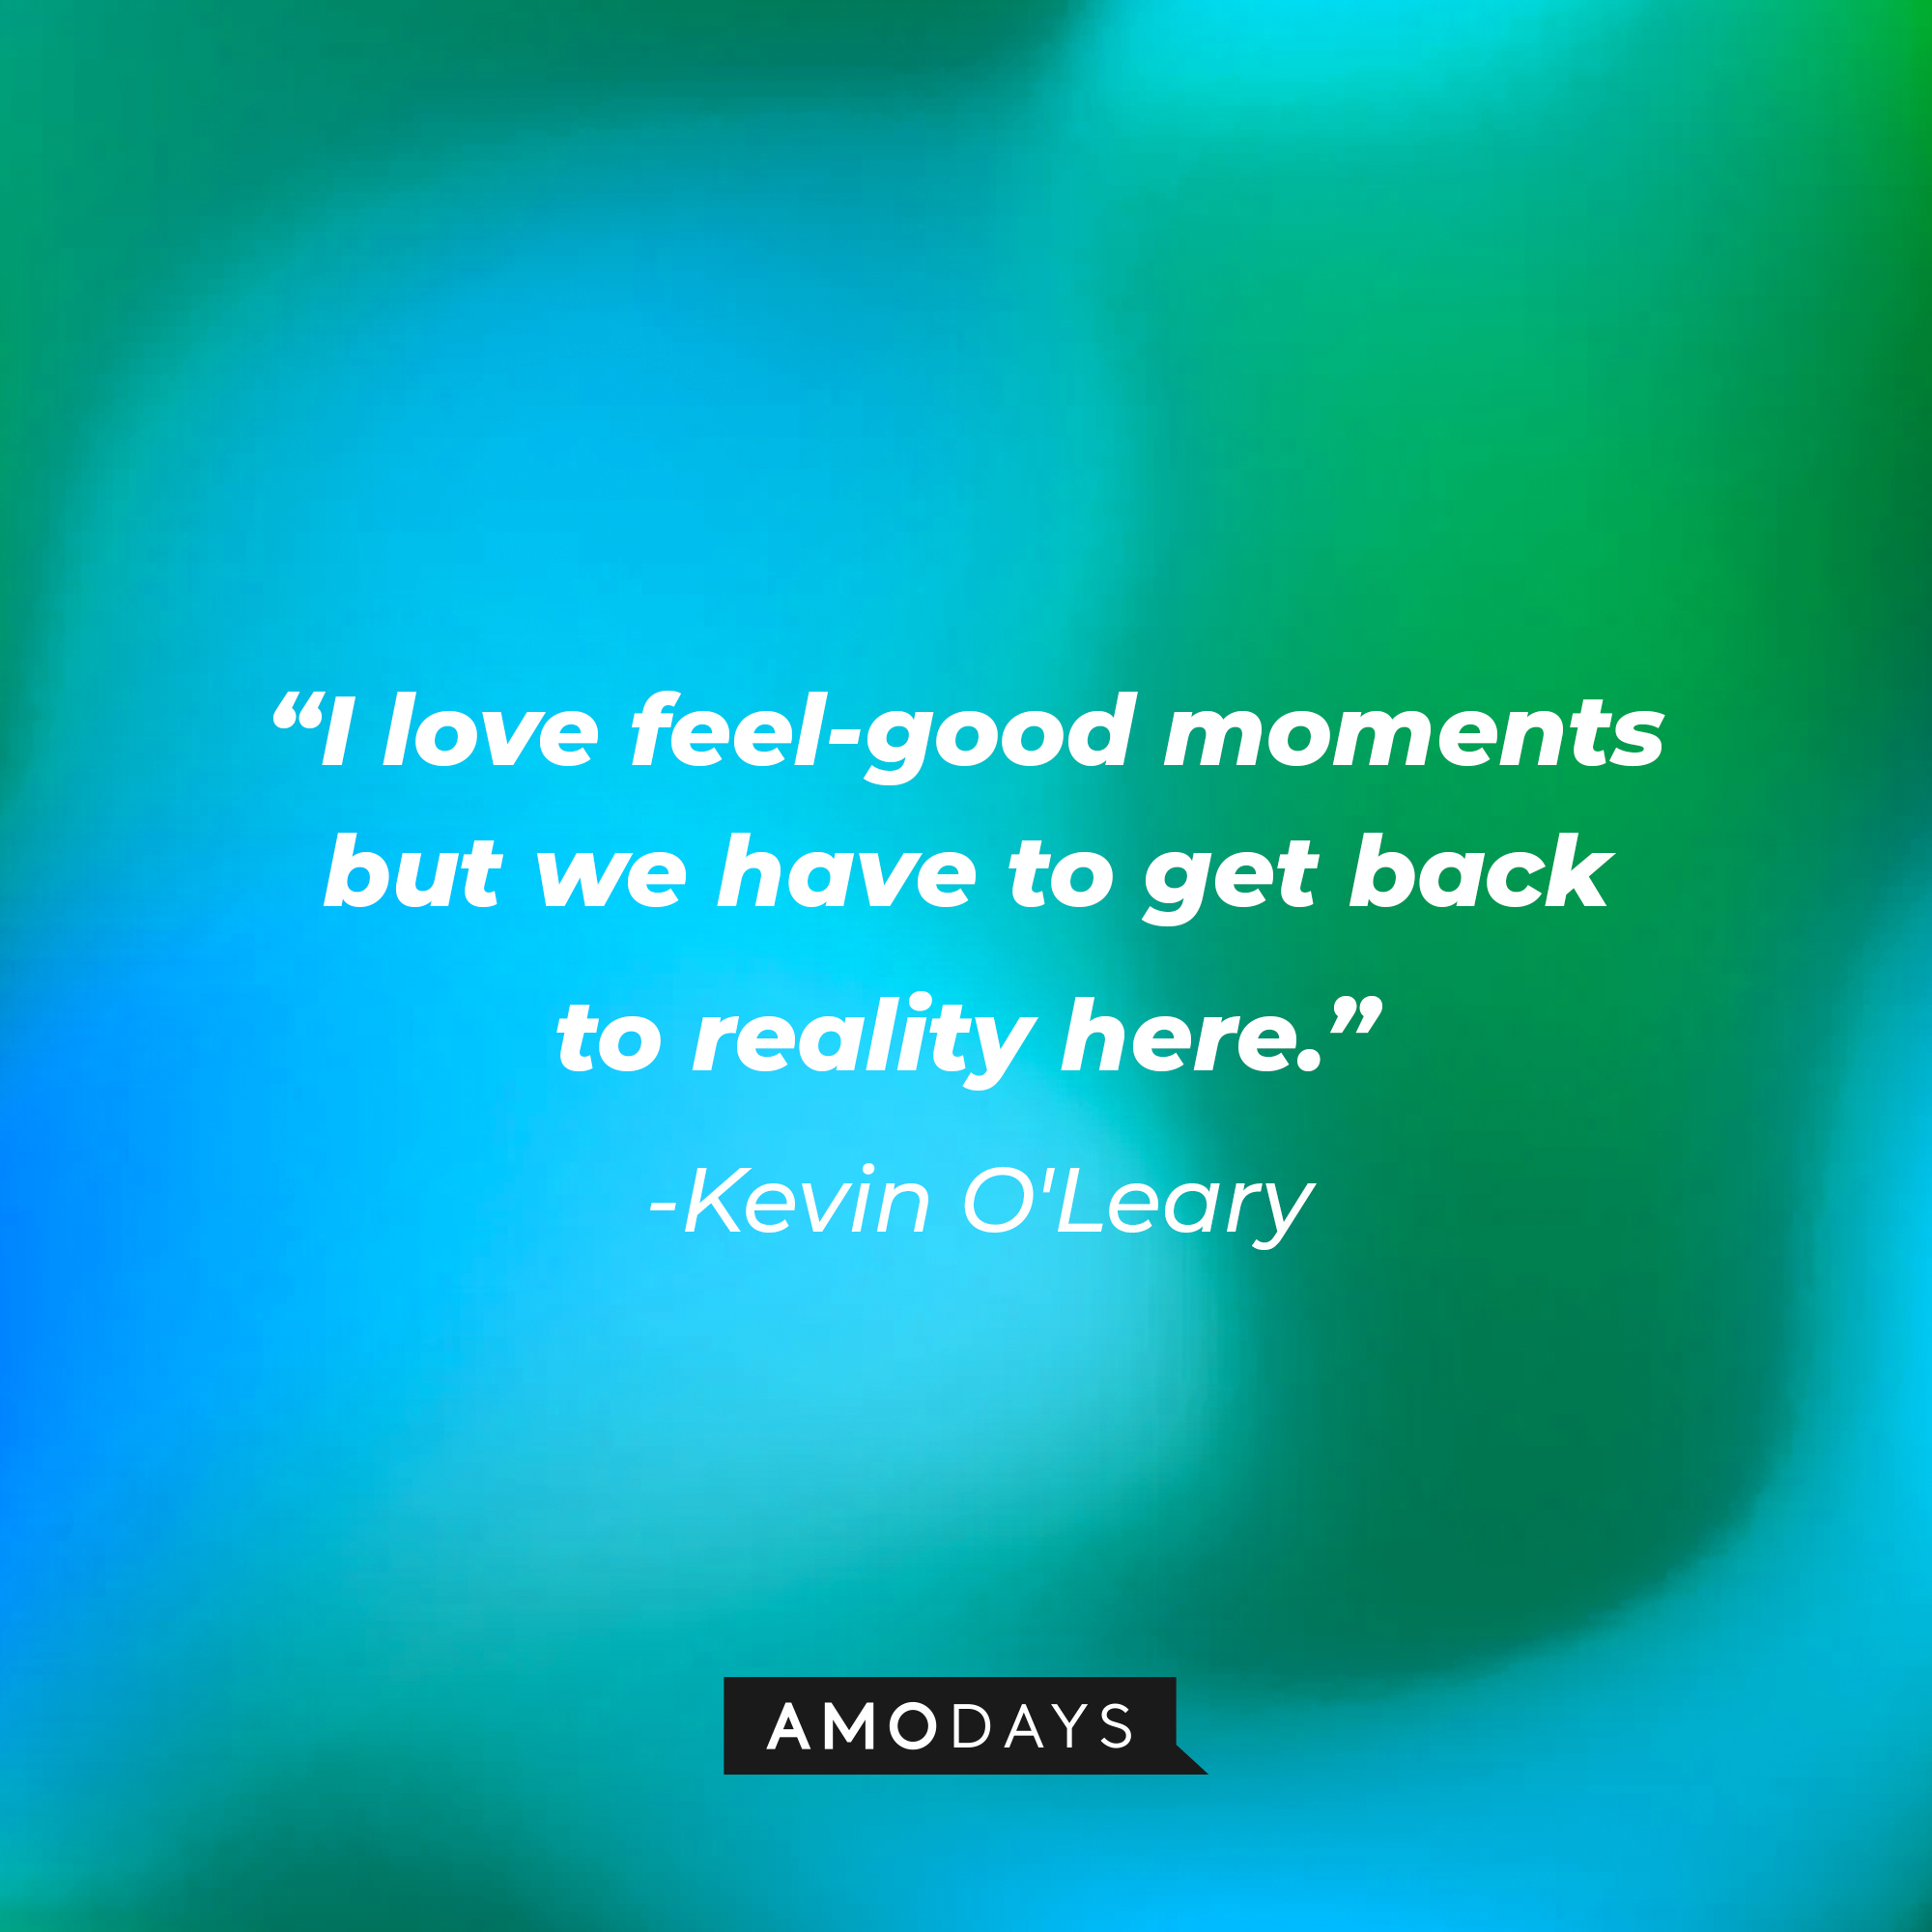 A photo with Kevin O'Leary's quote, "I love feel-good moments but we have to get back to reality here." | Source: Amodays